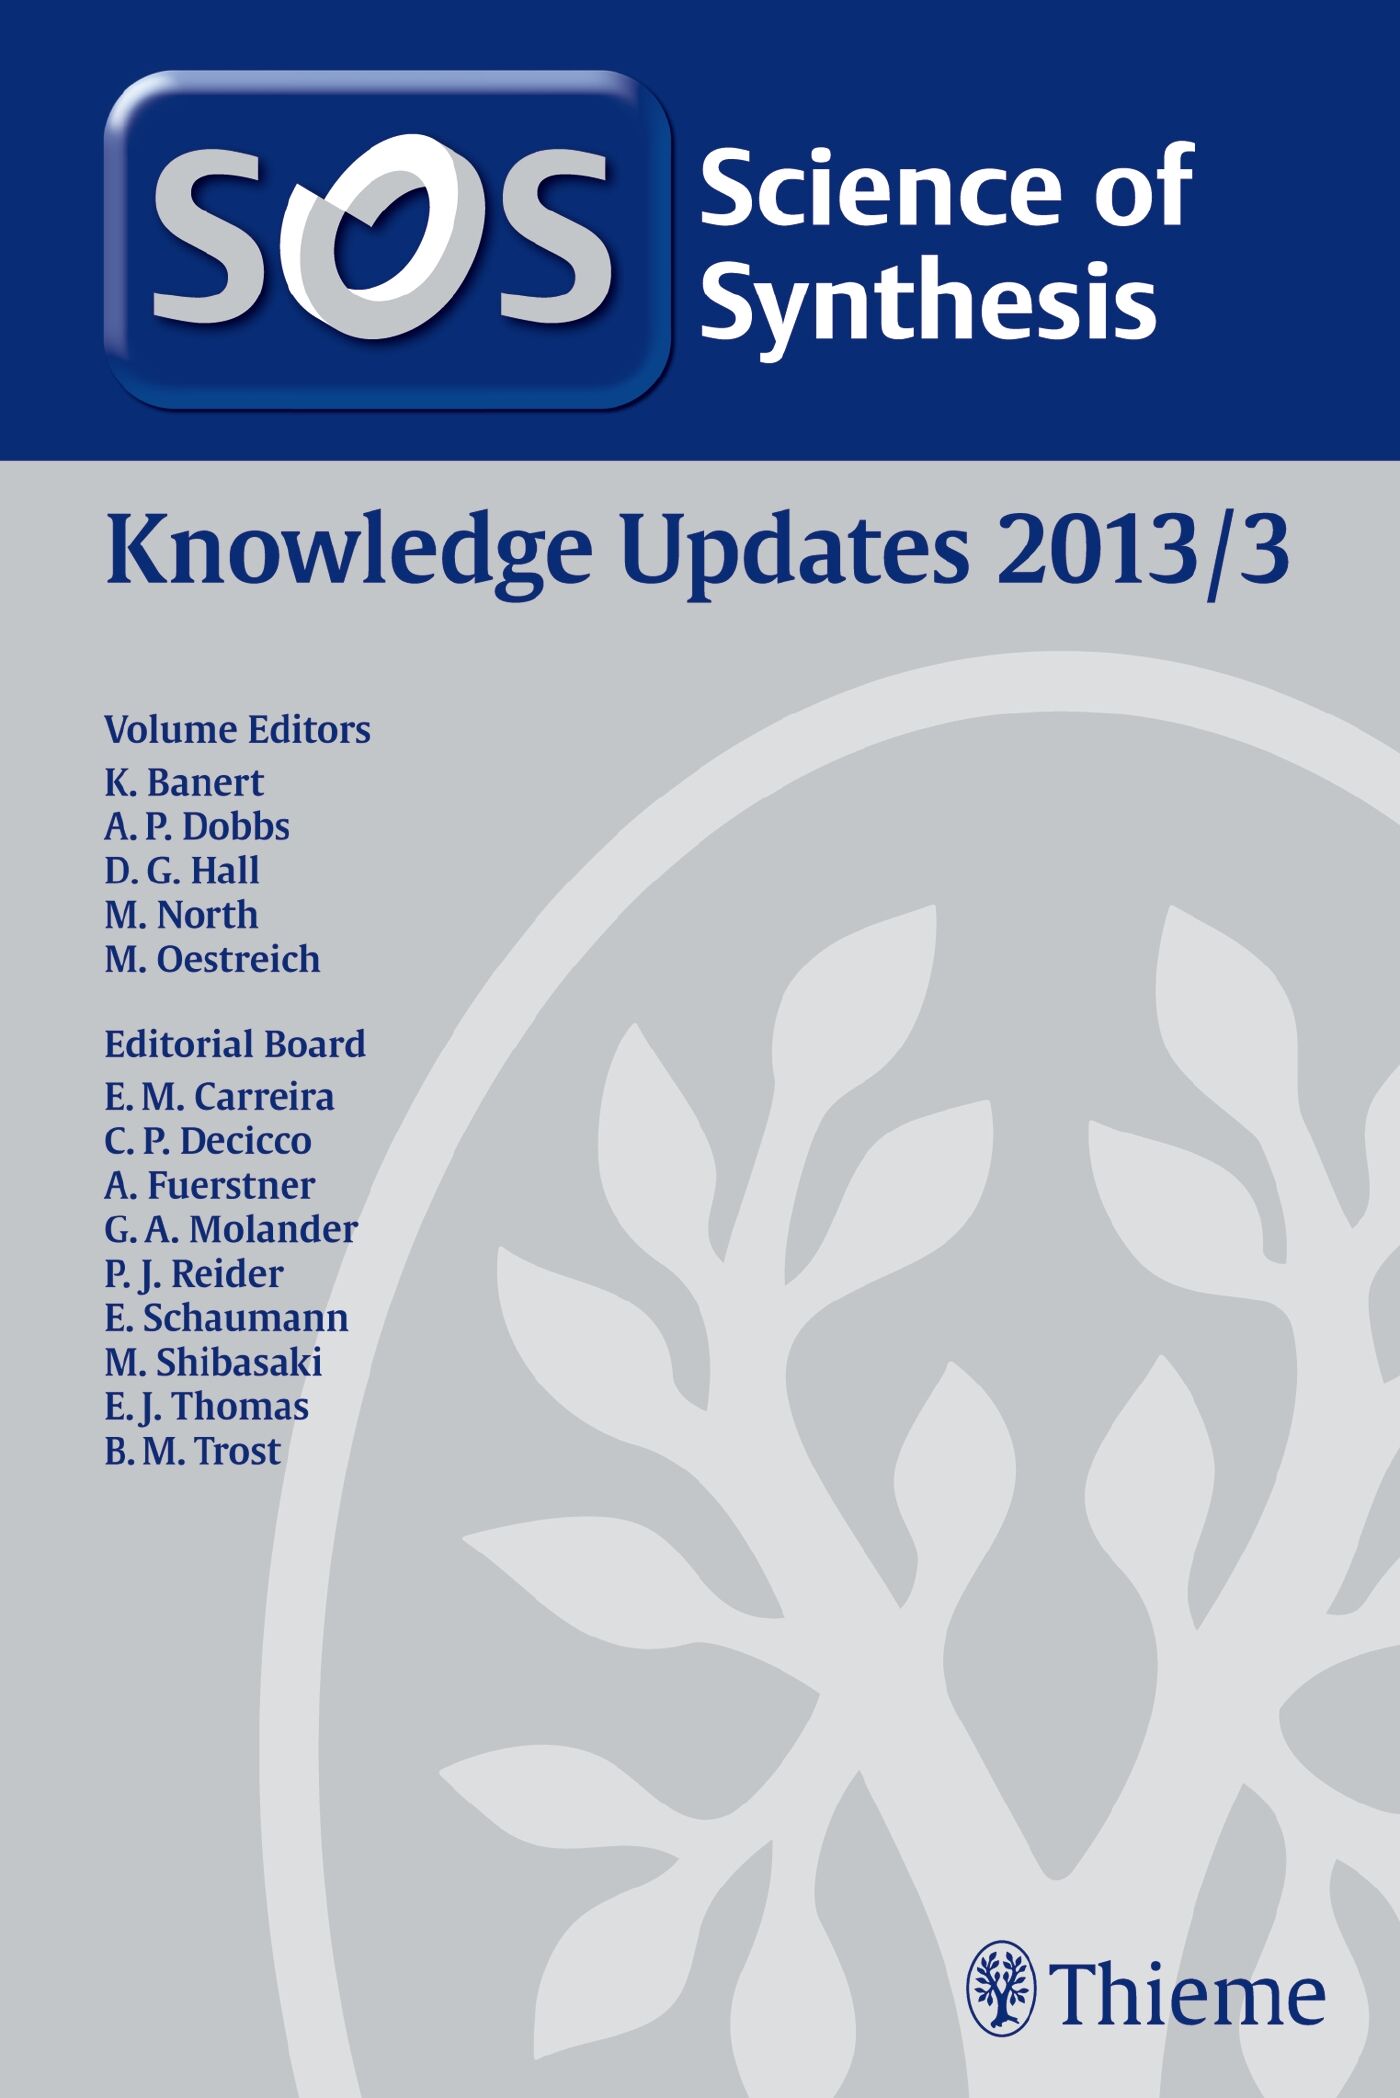 Science of Synthesis Knowledge Updates 2013 Vol. 3, 9783131727817